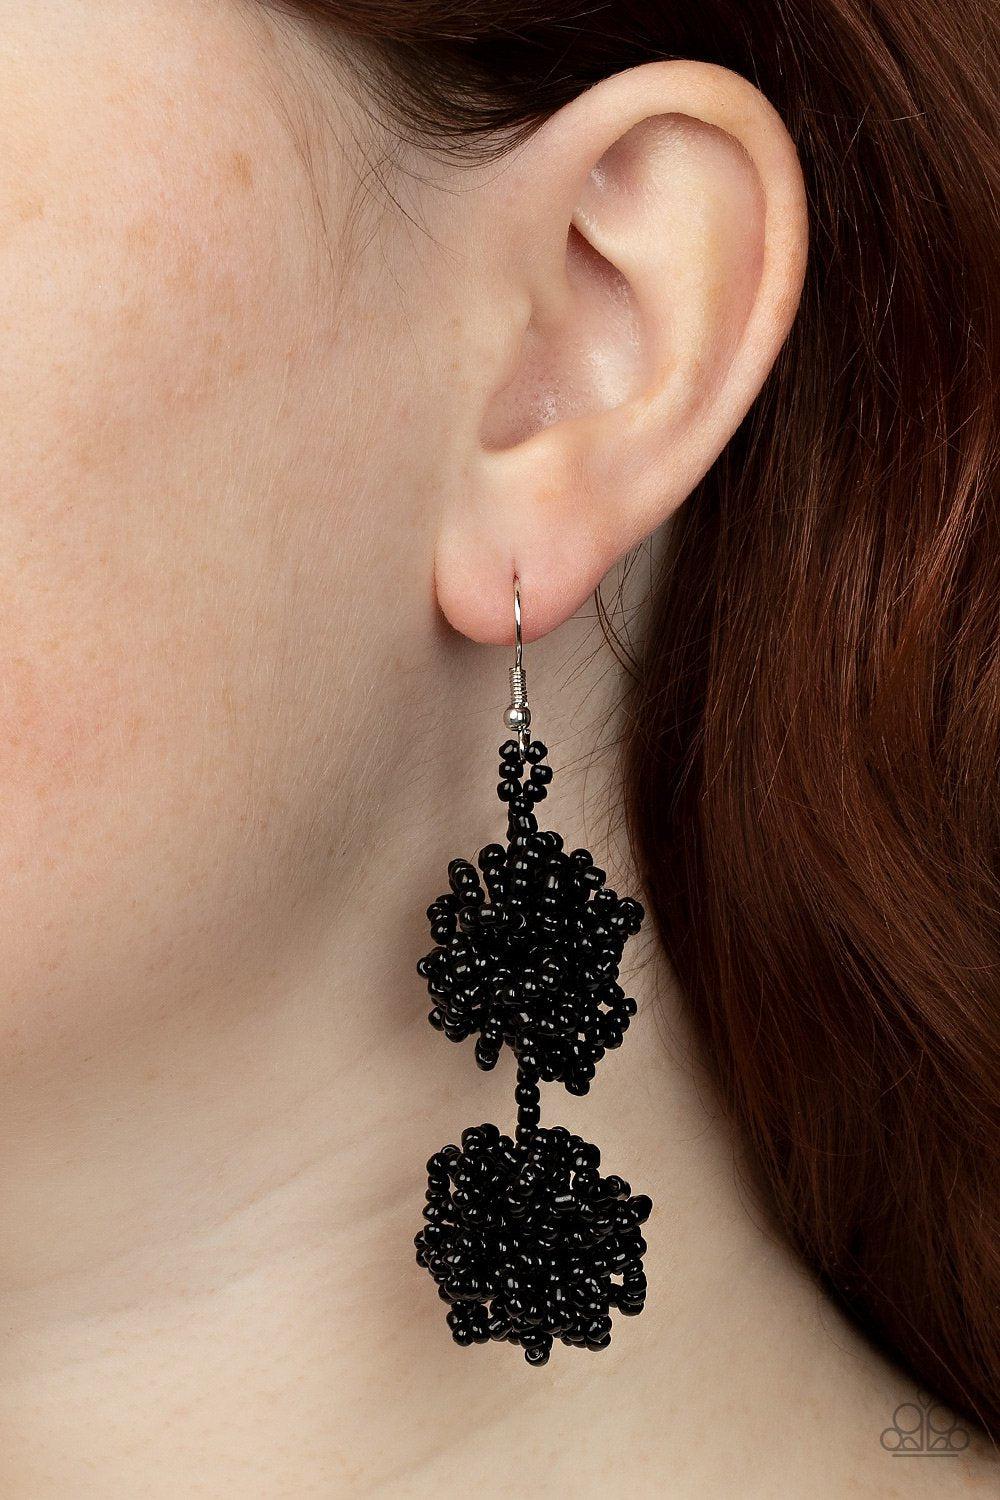 Celestial Collision Black Seed Bead Earrings - Paparazzi Accessories- lightbox - CarasShop.com - $5 Jewelry by Cara Jewels